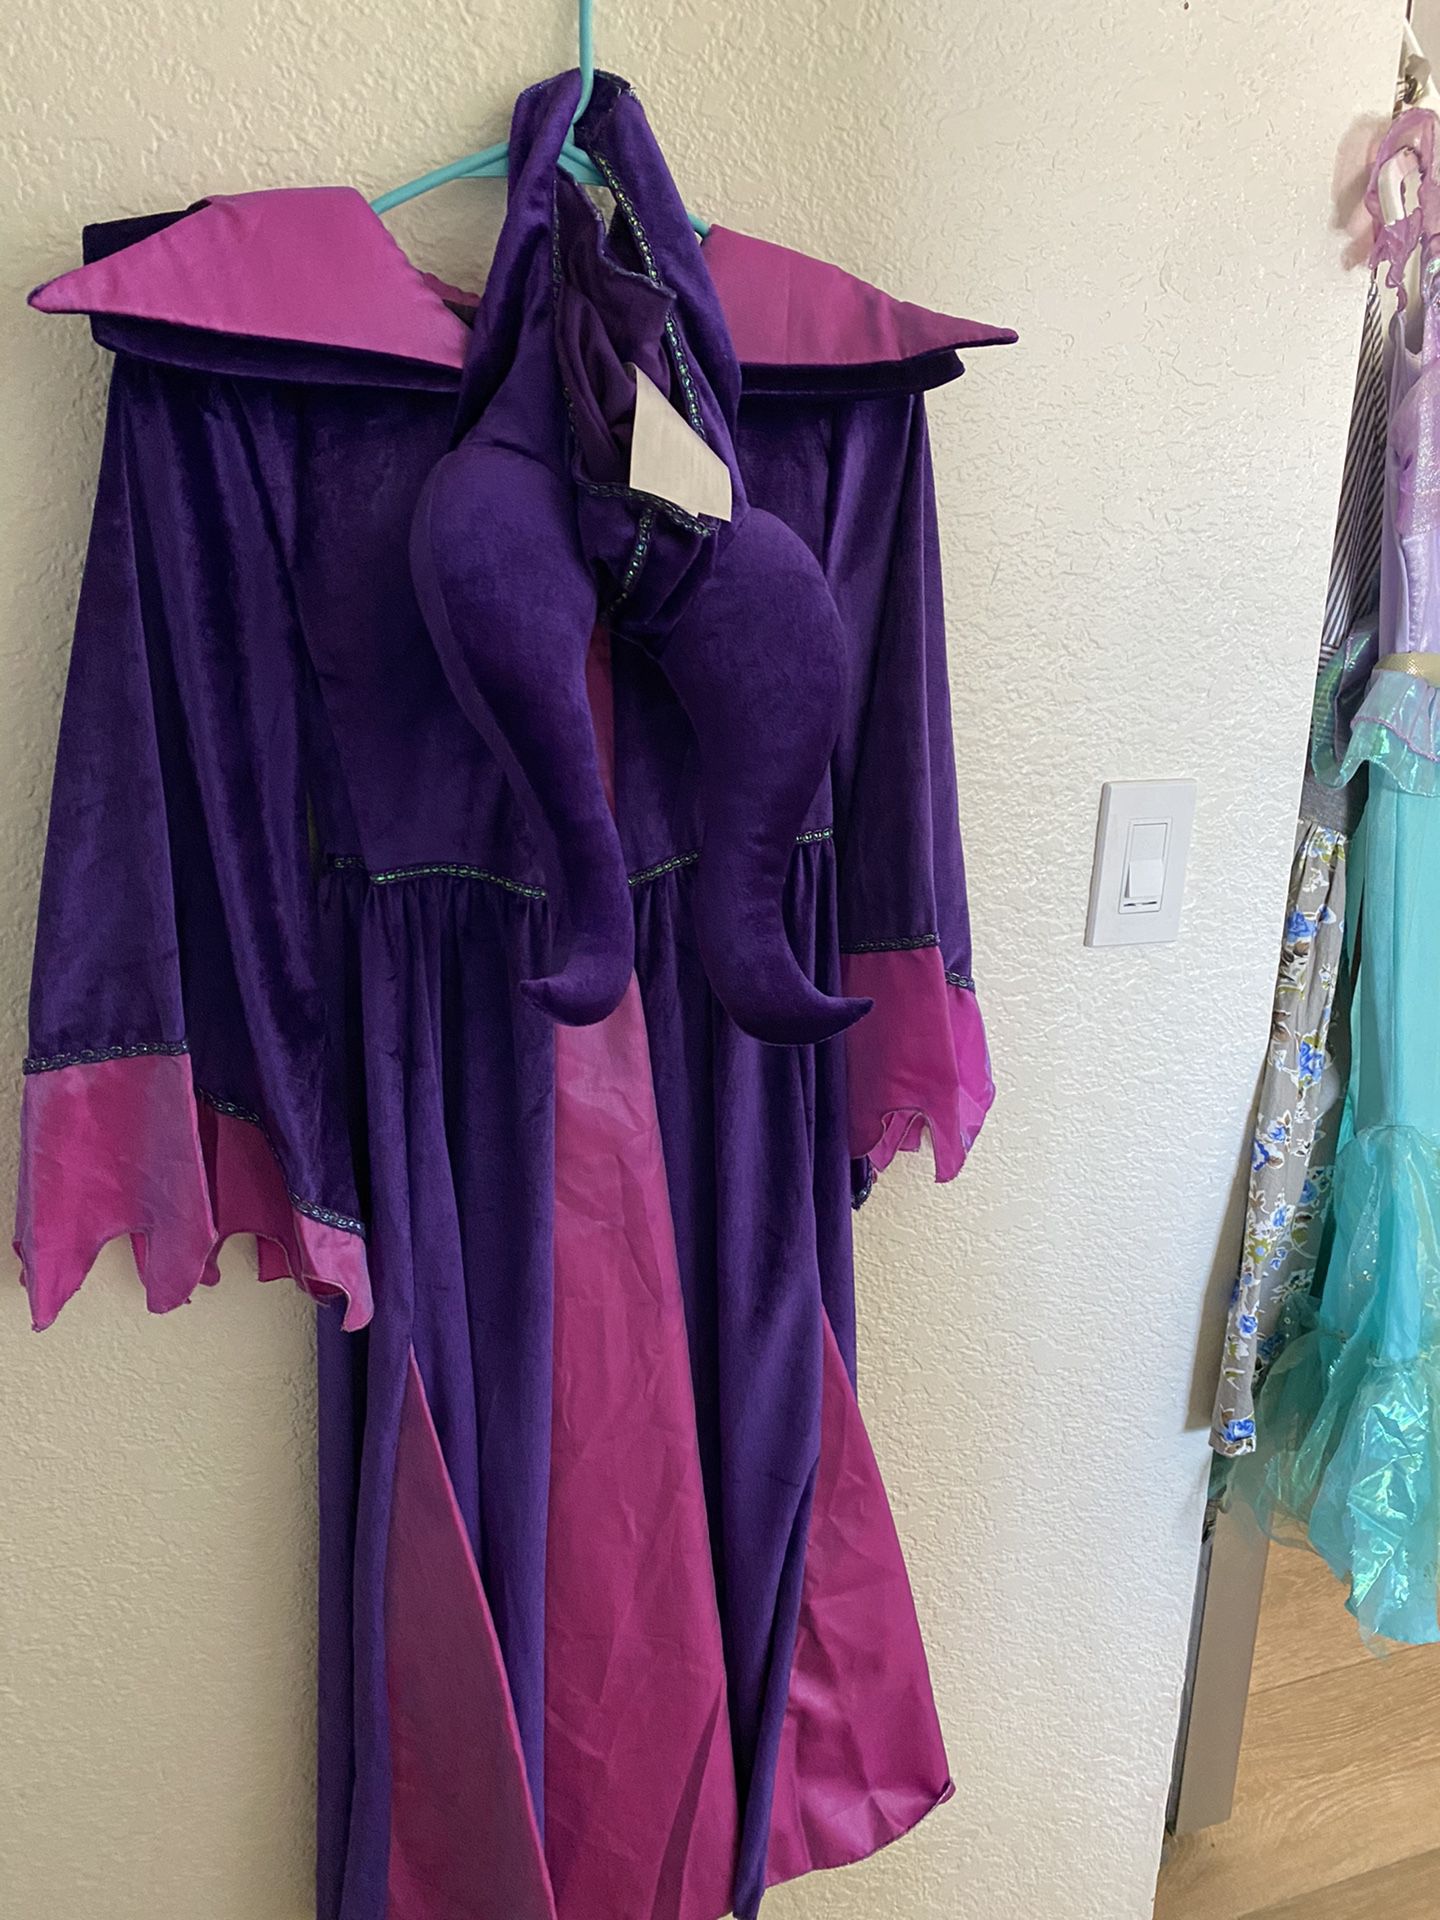 Maledicente Disney Store Costume dress and horns size 9/10